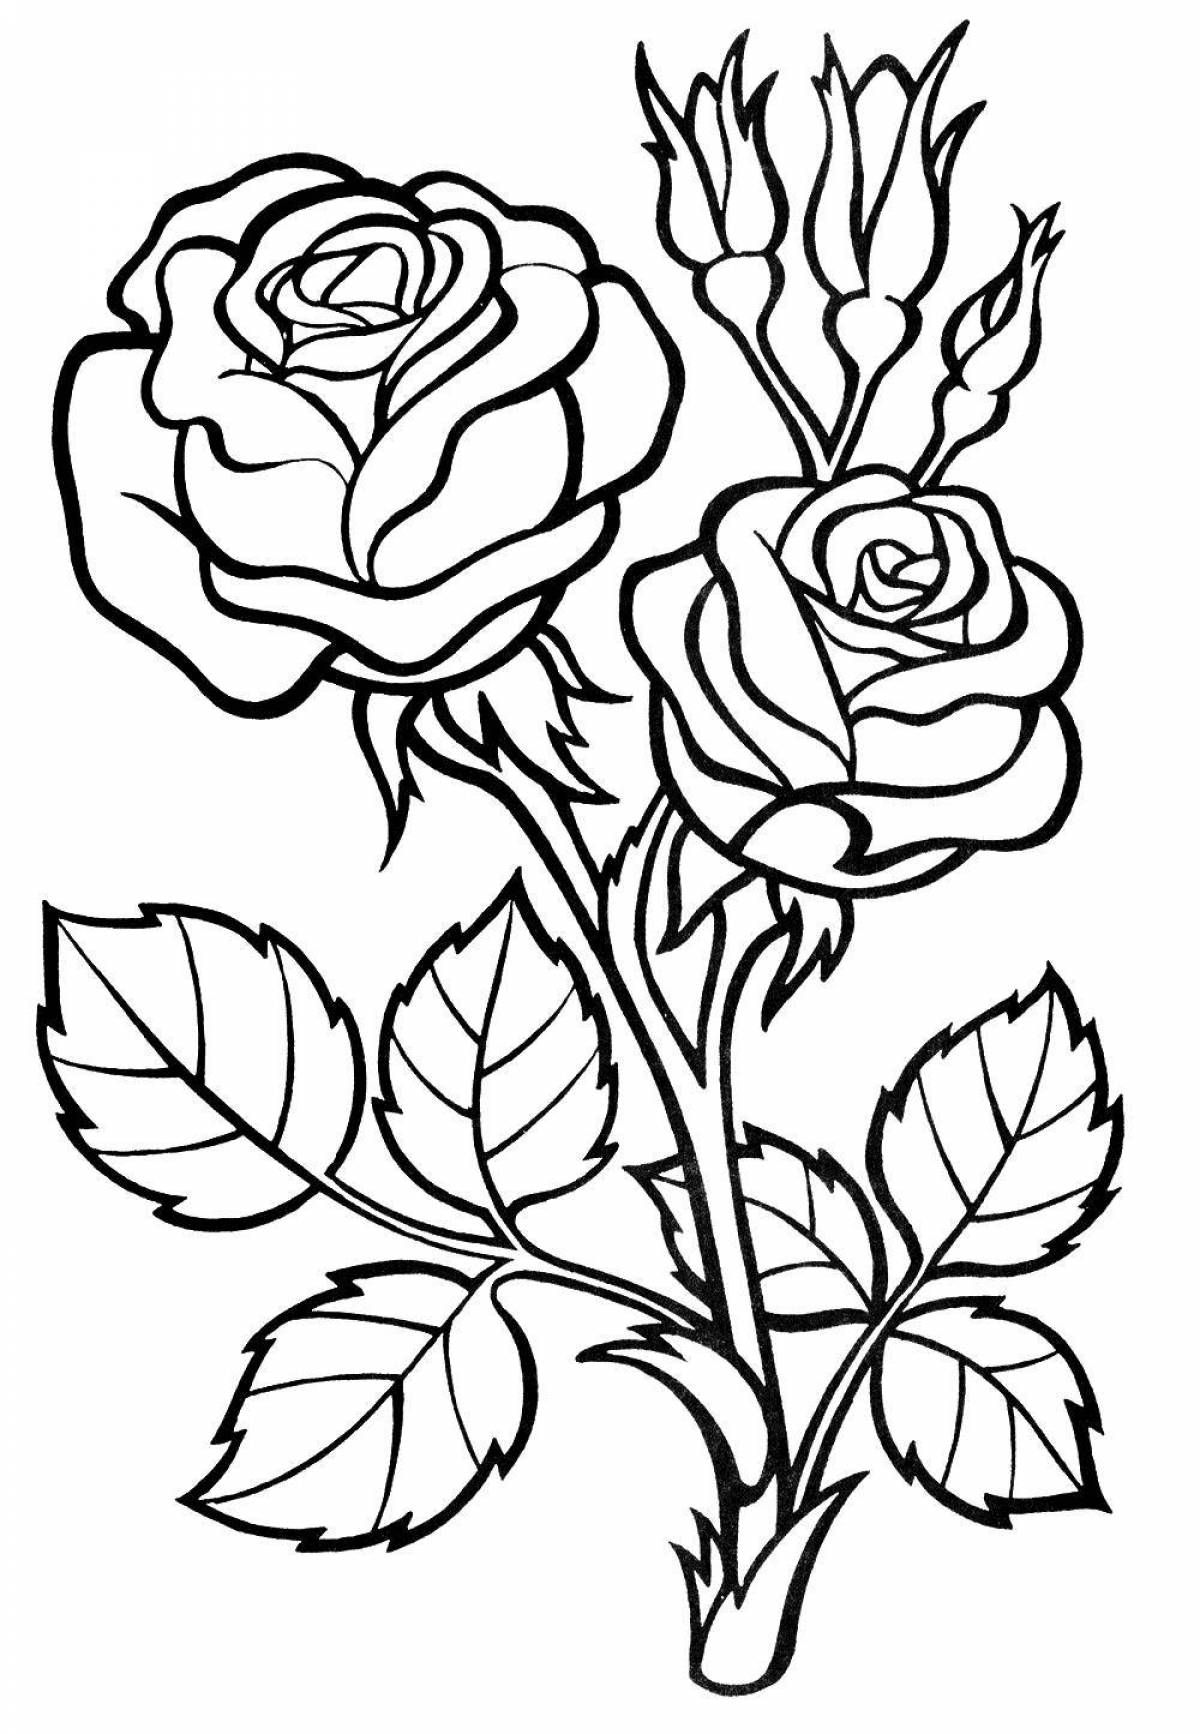 Live coloring beautiful flowers